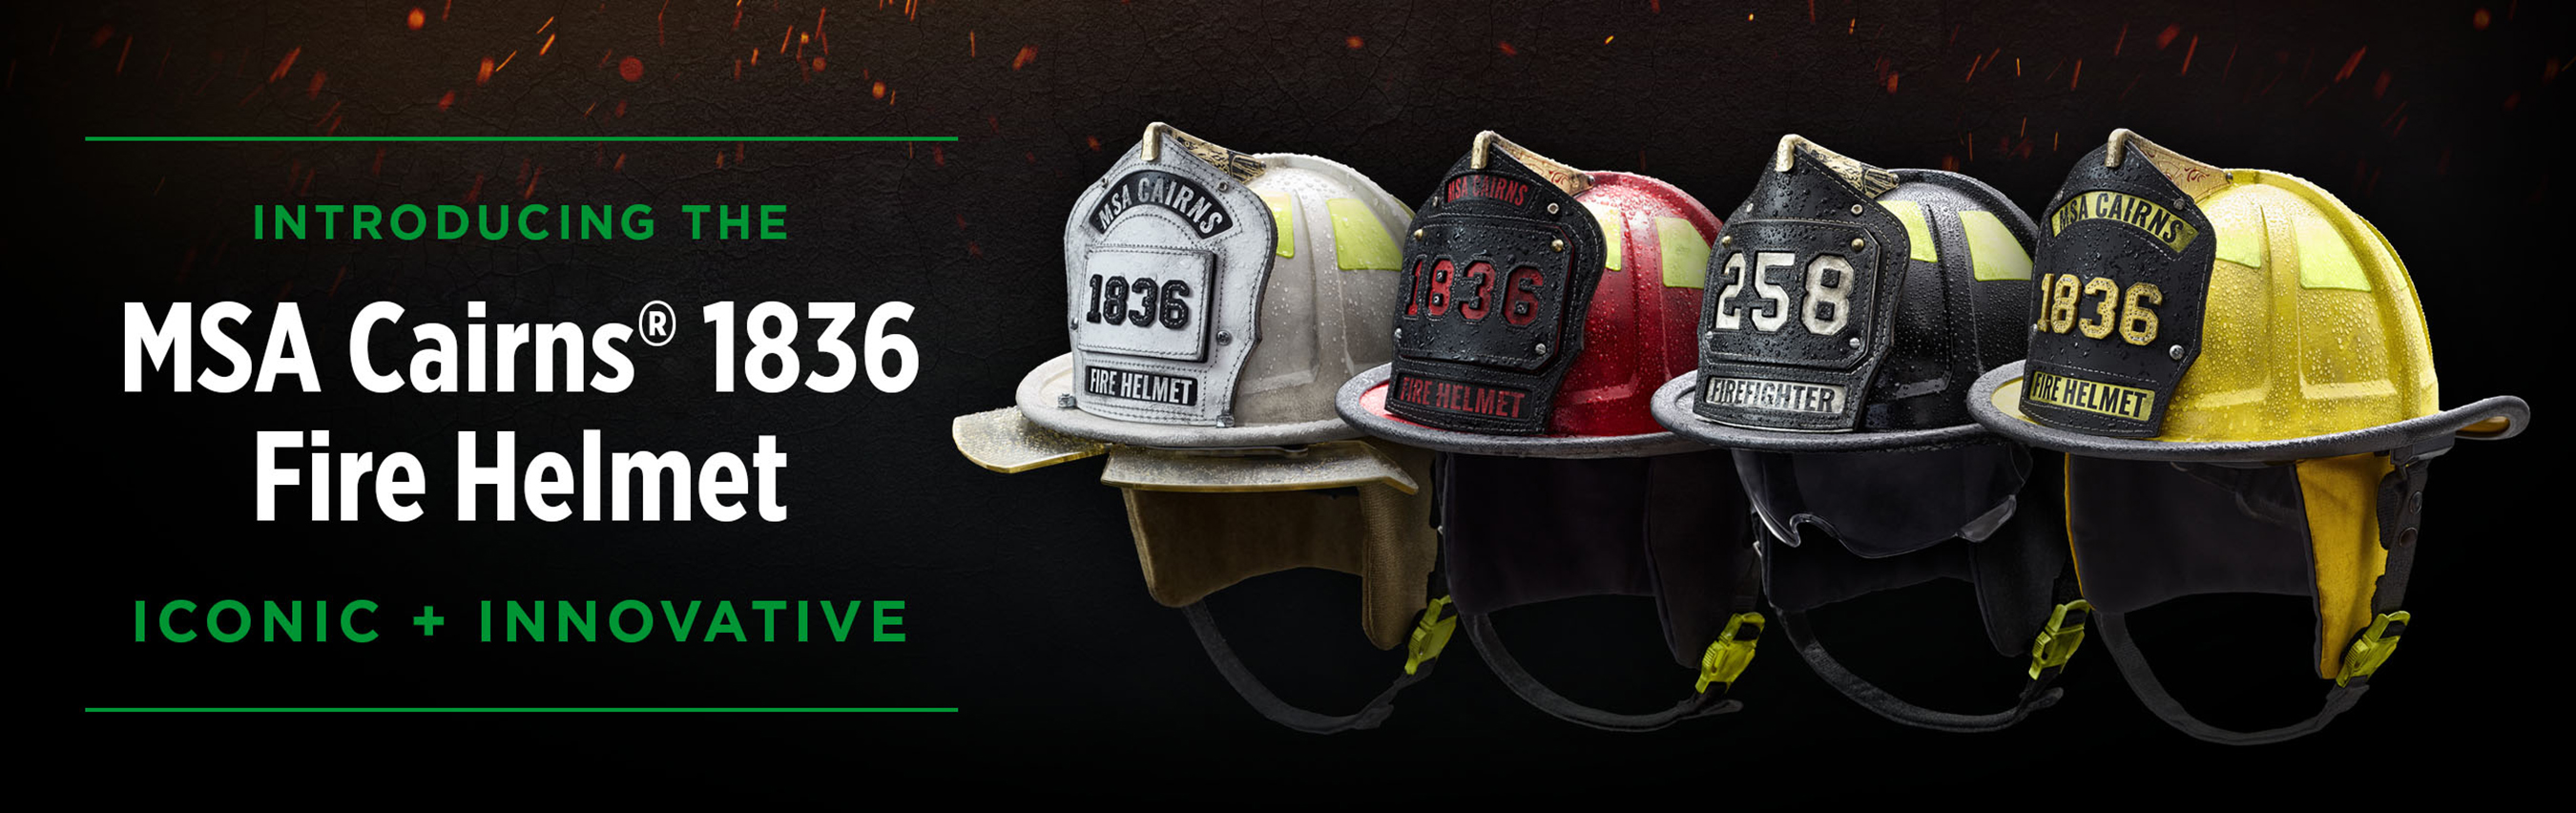 The MSA Cairns 1836 Fire Helmet will be making its debut at the 2024 Fire Department Instructors Conference (FDIC) International in Indianapolis.